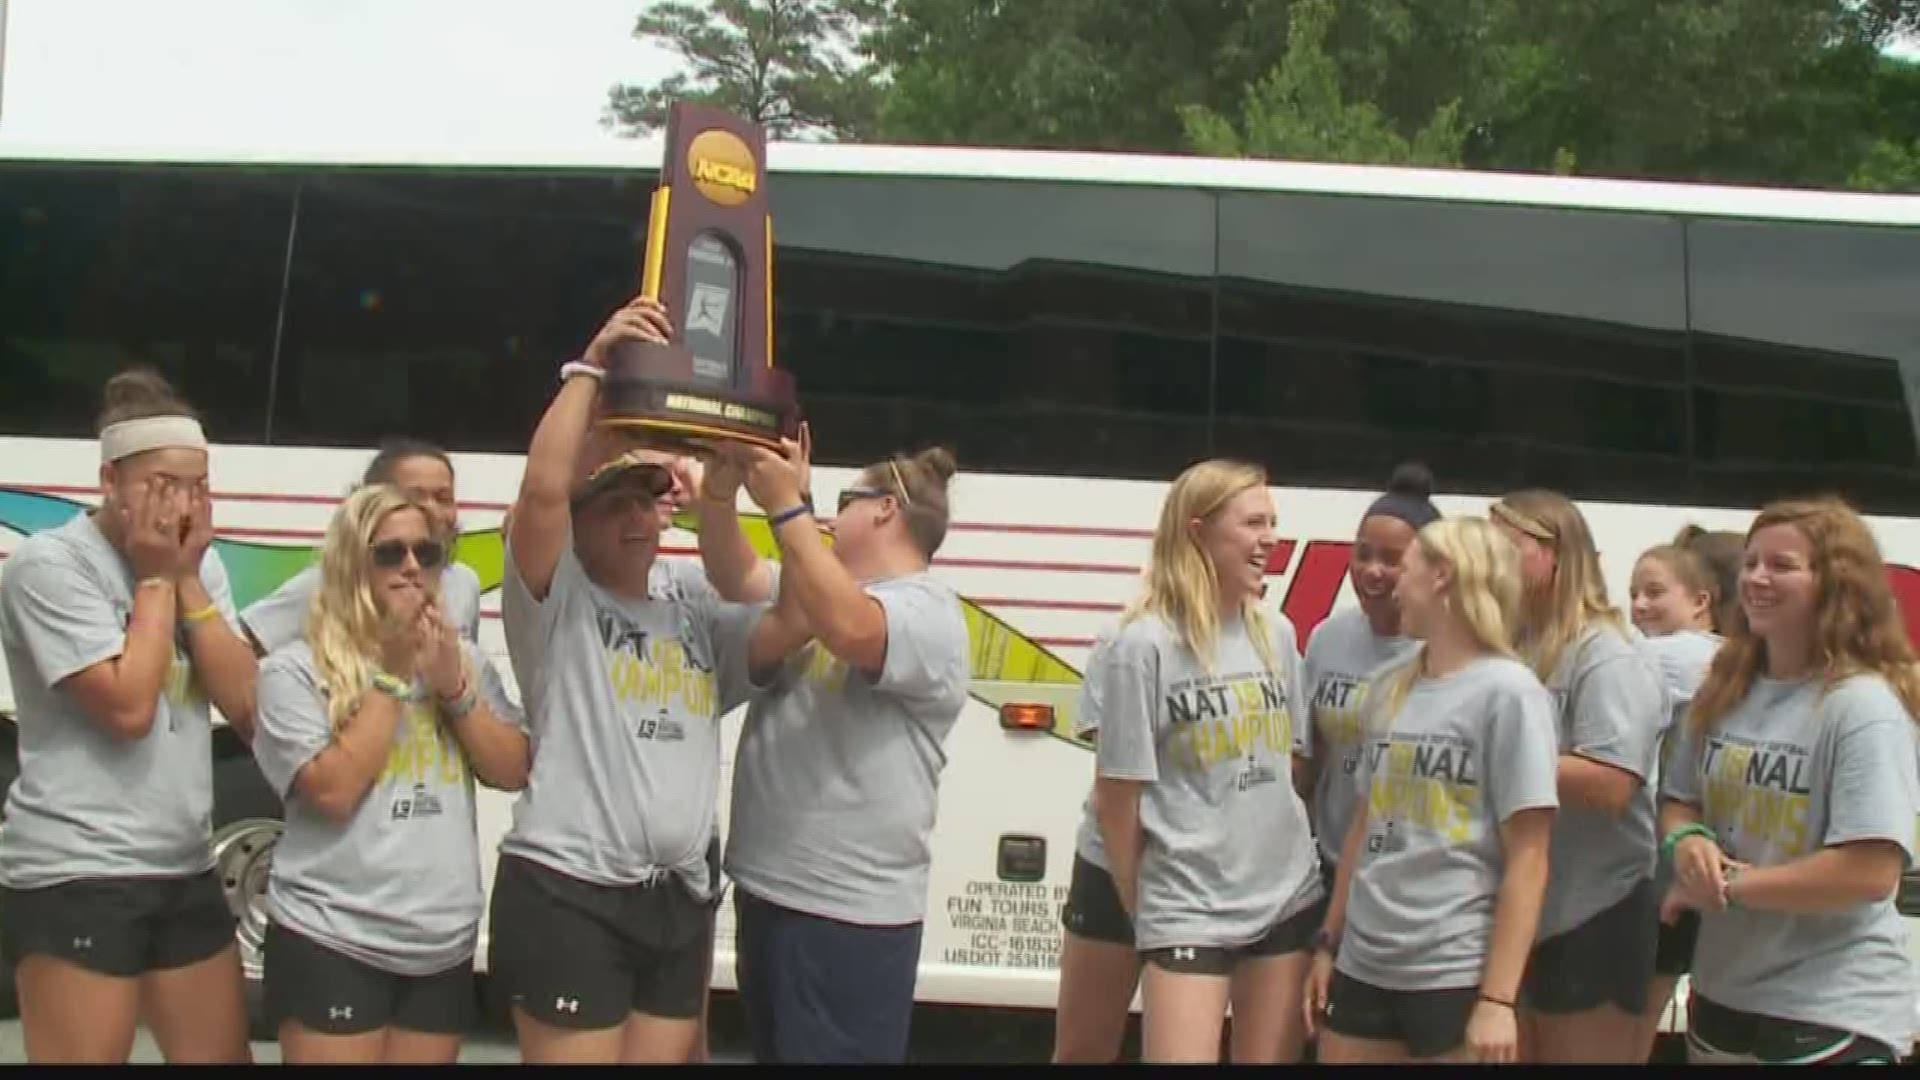 Virginia Wesleyan softball is making a habit of this. Wednesday afternoon they returned to campus with their second straight NCAA title.